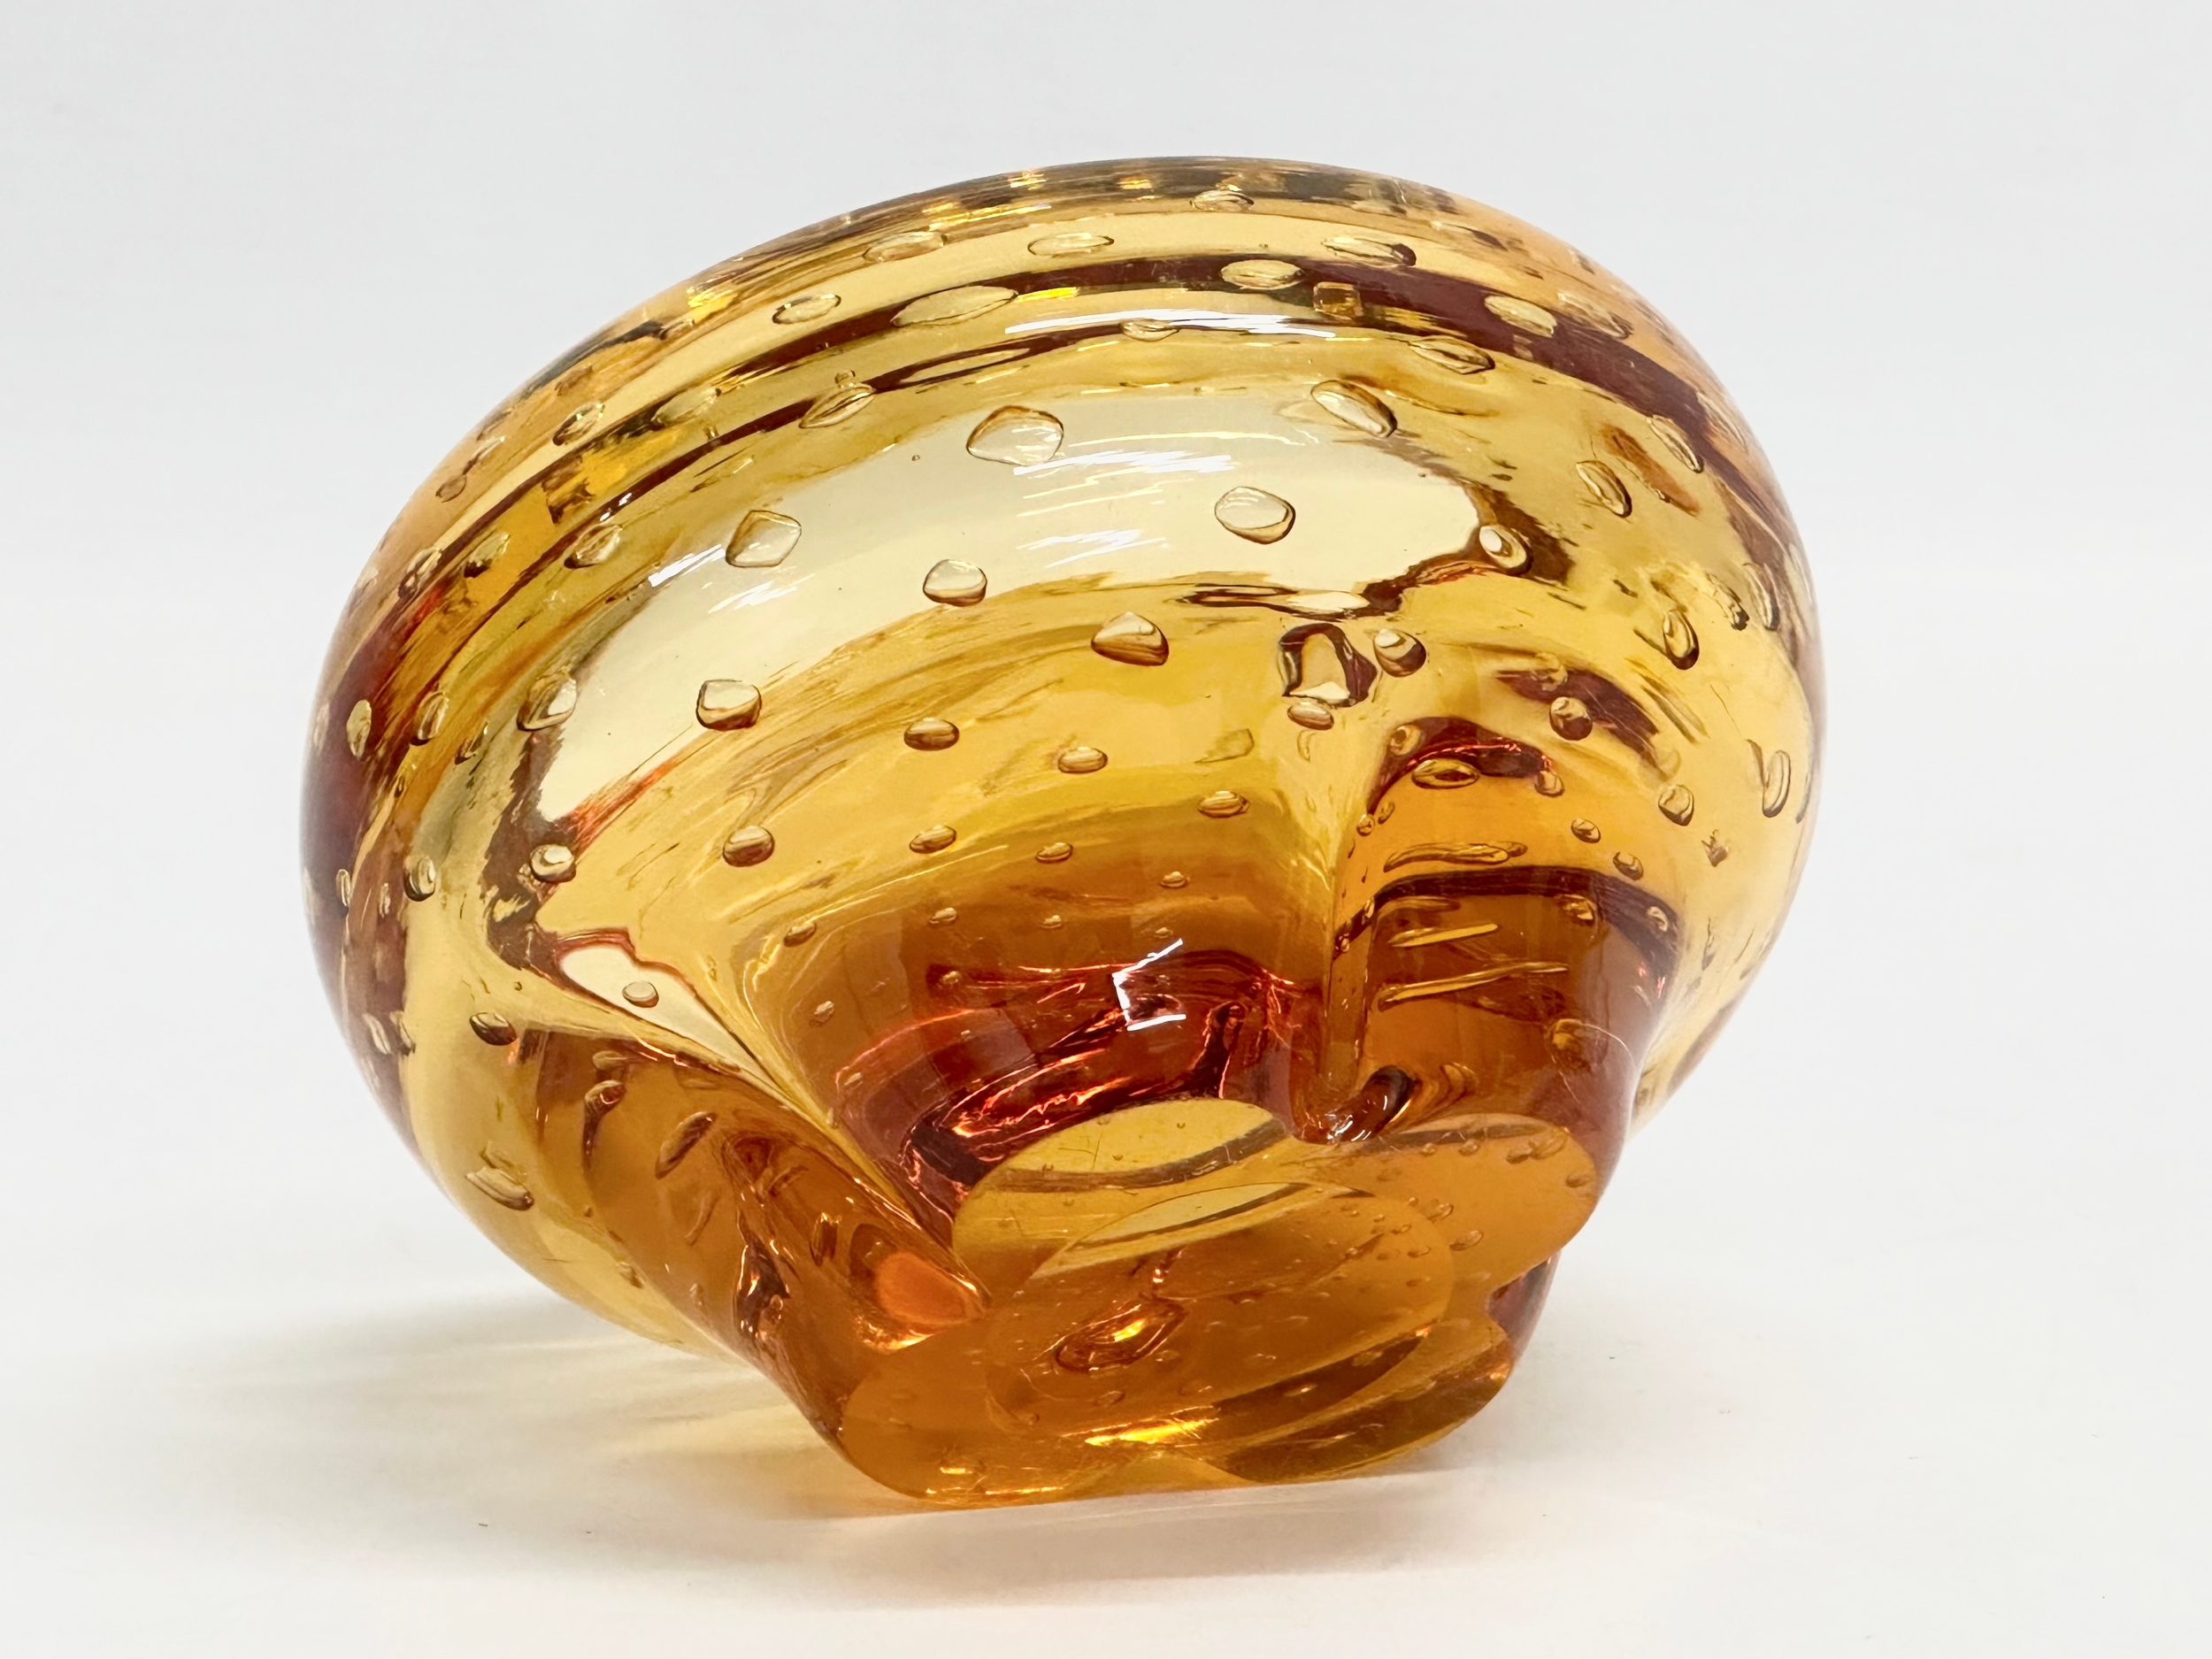 A ‘Molar’ Bubbled Bowl designed by Geoffrey Baxter for Whitefriars. 12x7cm - Image 3 of 3